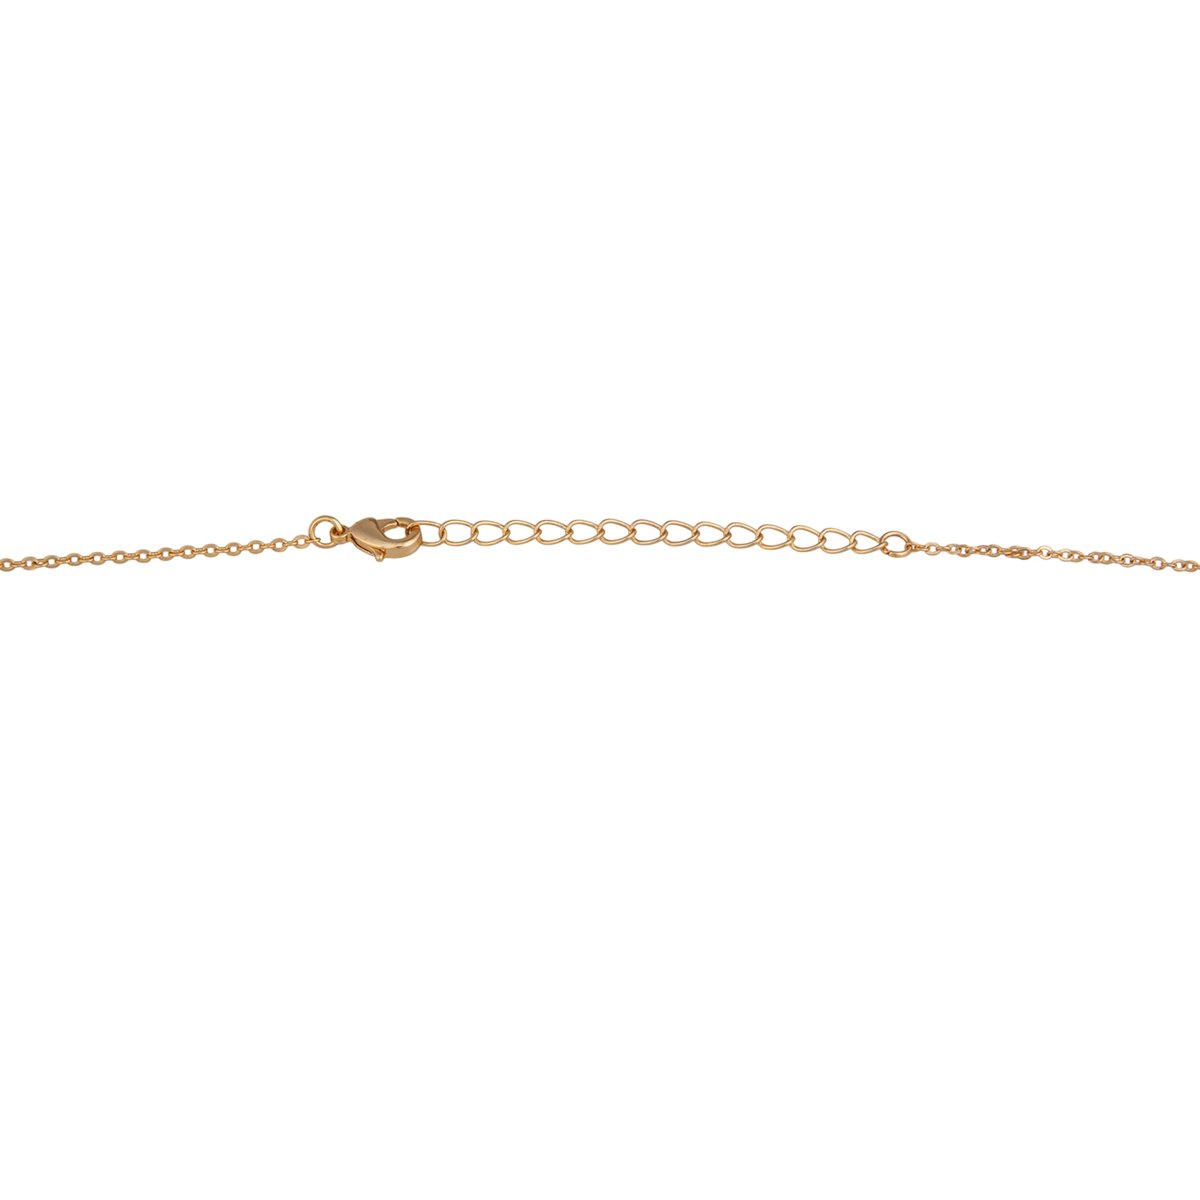 Charles Albert Jewelry - Thin Gold Tone Base Metal Chain - 17in + 3in Extender